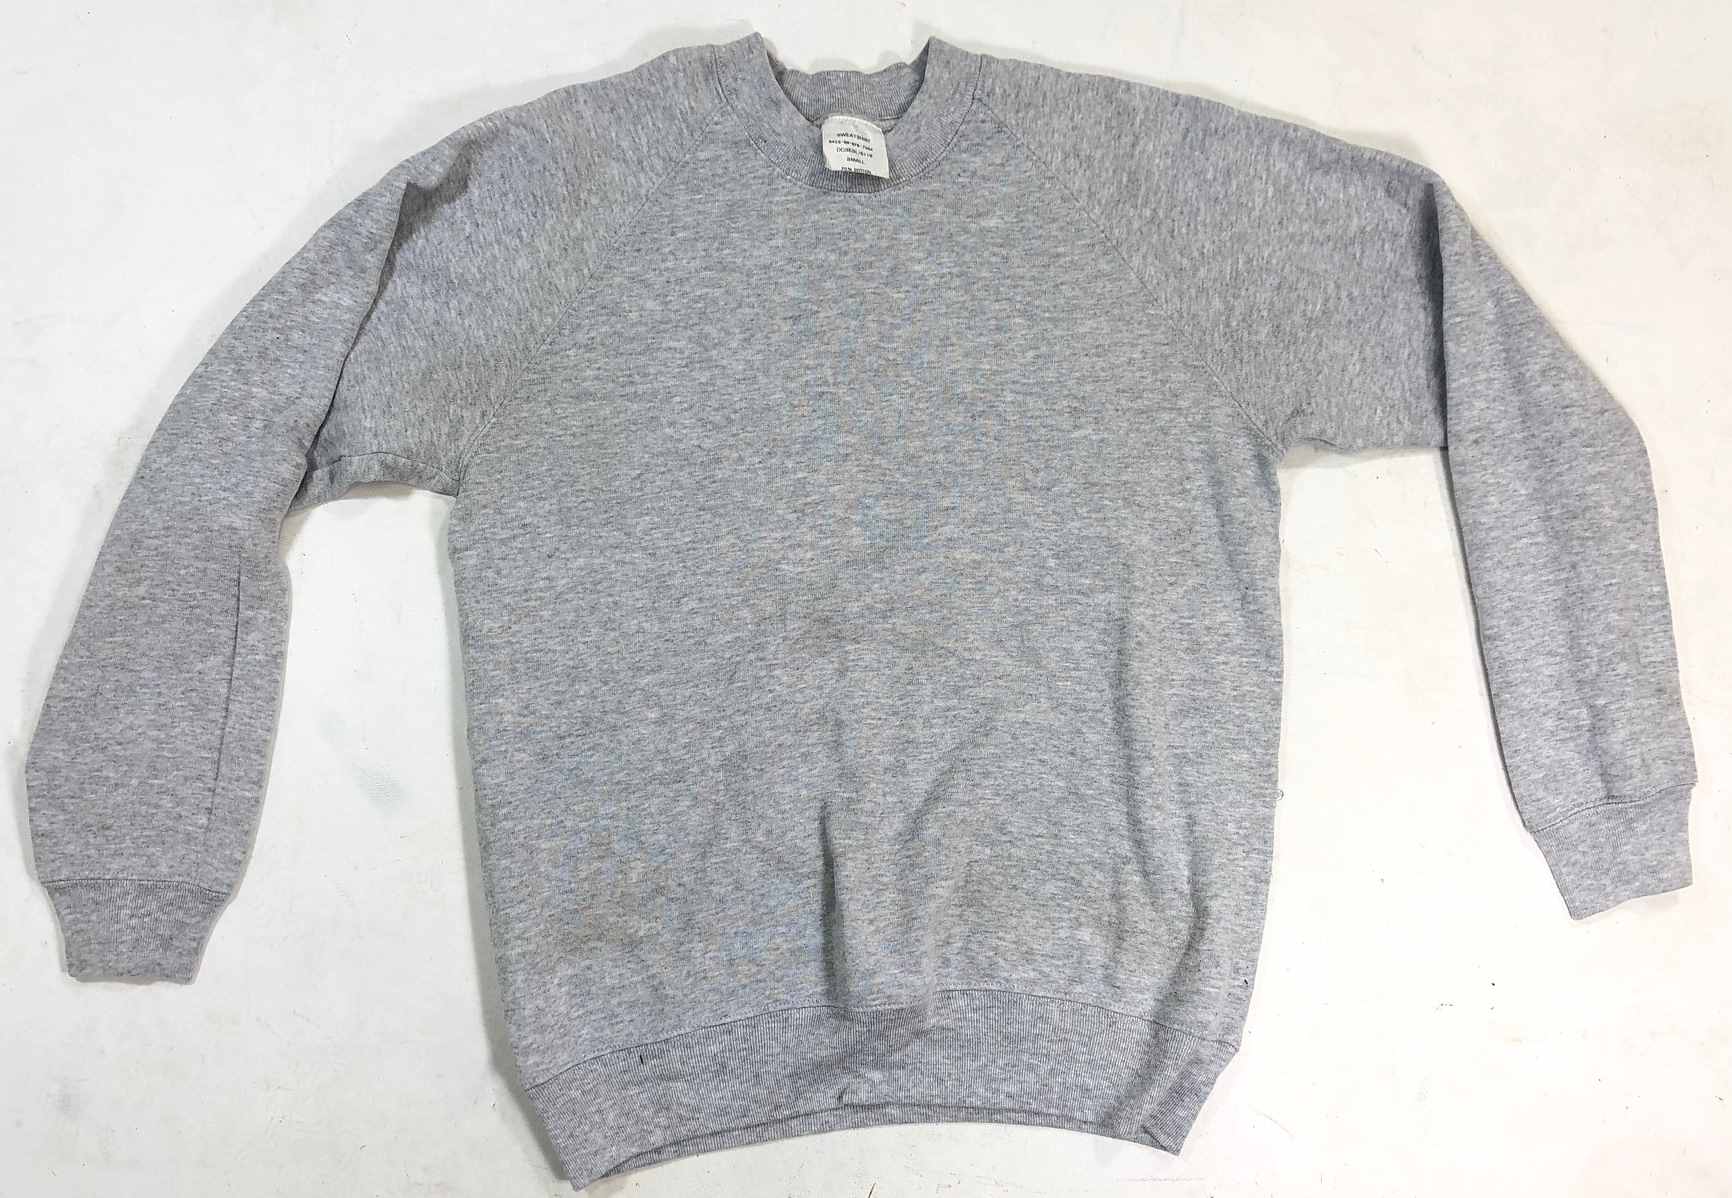 British army surplus Grey sweatshirt BRAND NEW, only available in SMALL ...